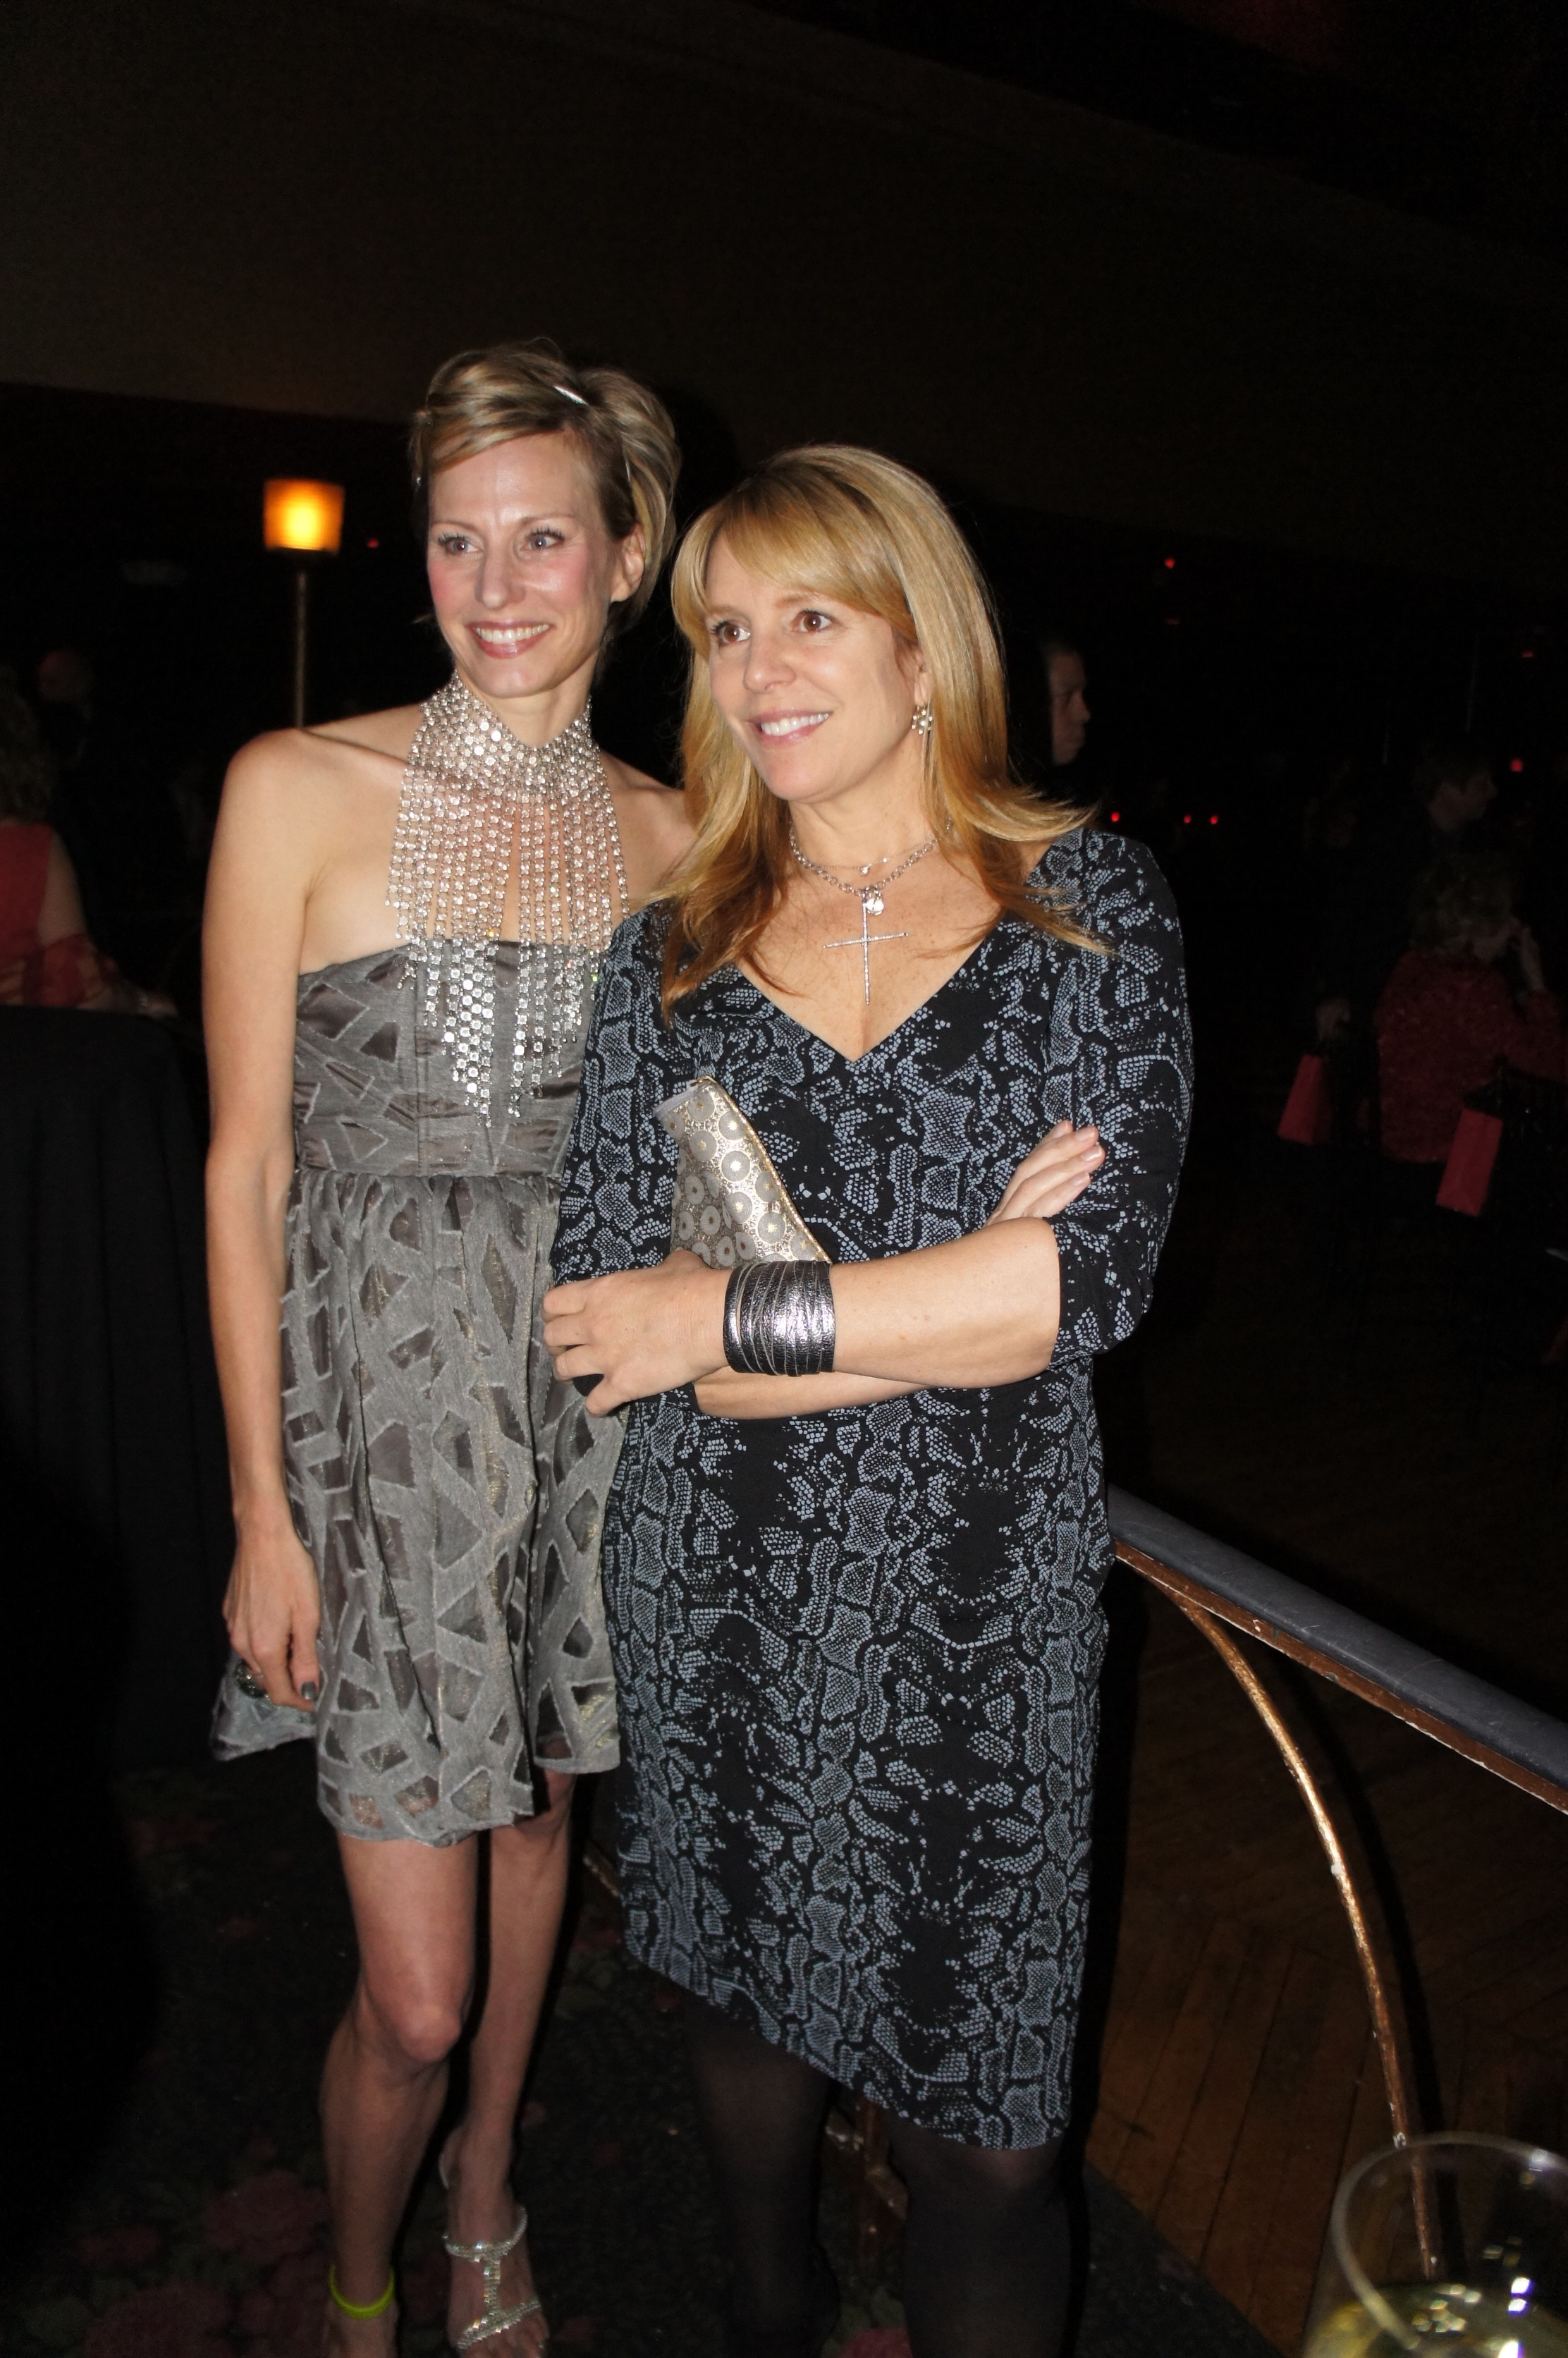 Missy Hargraves with Martha McCulley at Naked Angels Benefit in New York.